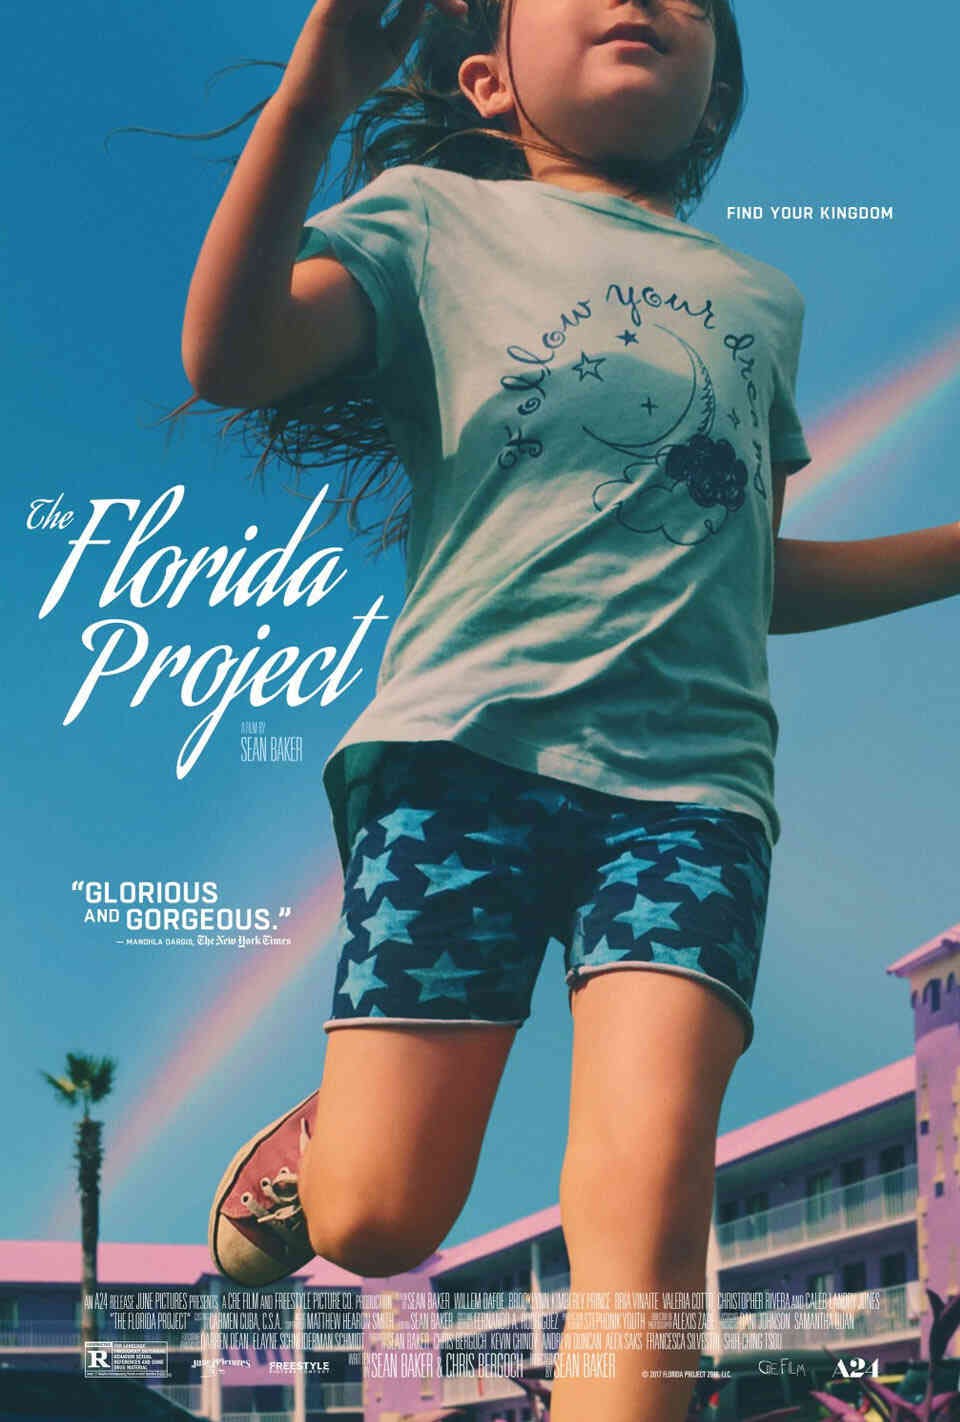 Read The Florida Project screenplay (poster)